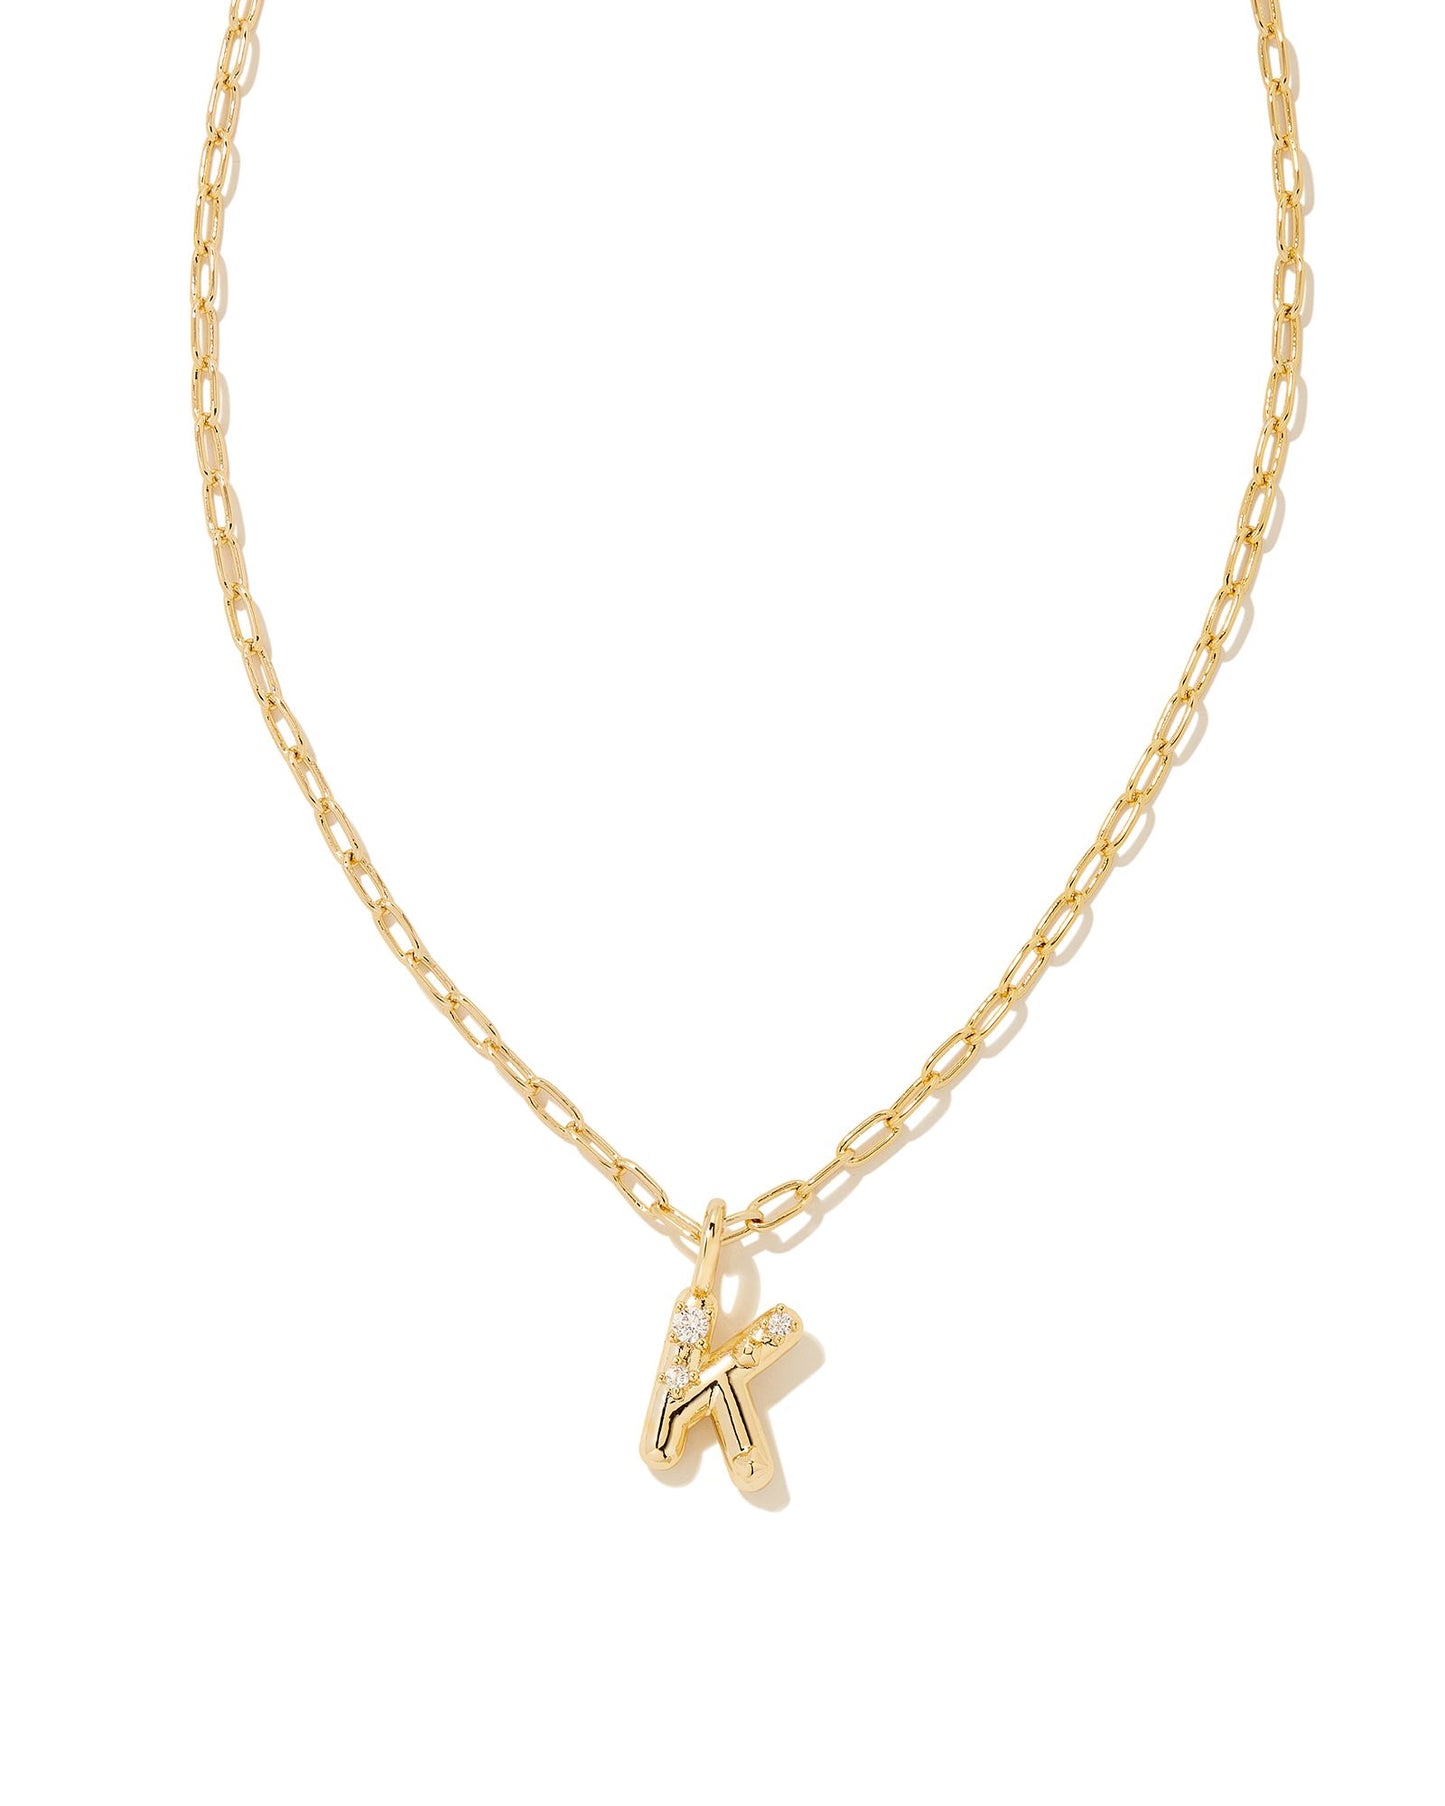 Personalize your everyday look with the Crystal Letter Short Pendant Necklace in White Crystal. Whether you’re rocking your initial or a loved one’s, this sentimental layer is one you’ll keep coming back to again and again.  Dimensions- 16' CHAIN WITH 3' EXTENDER, 0.62'L X 0.35"W PENDANT Metal- 14K Gold plated over brass Closure- Lobster Clasp Material-   White CZ Letter K